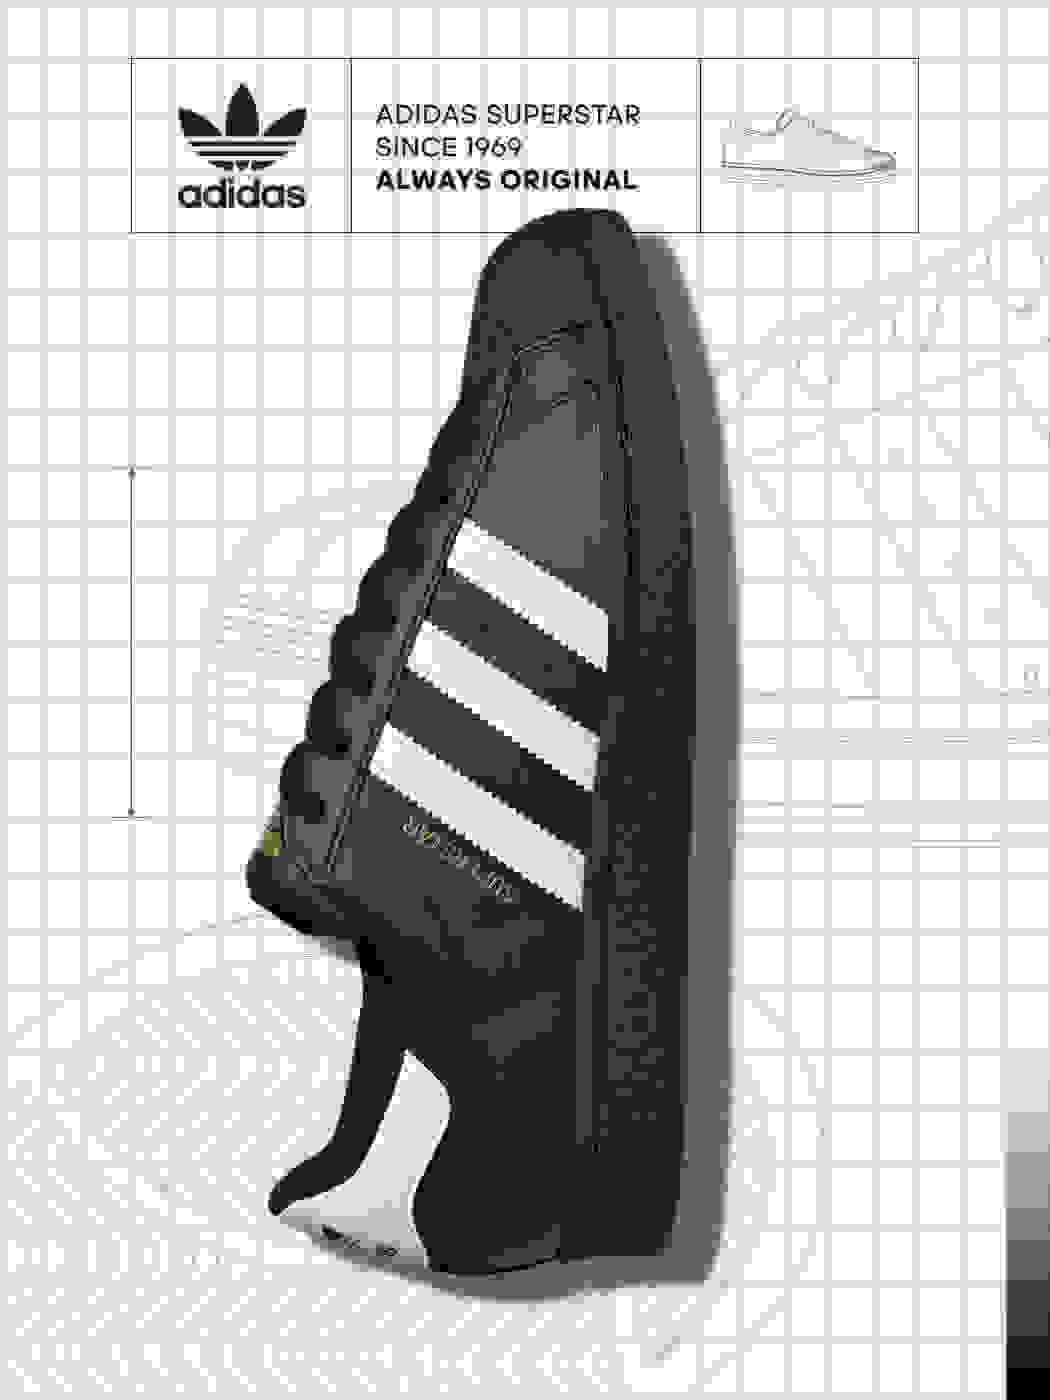 Shoes, Clothing and Accessories | adidas